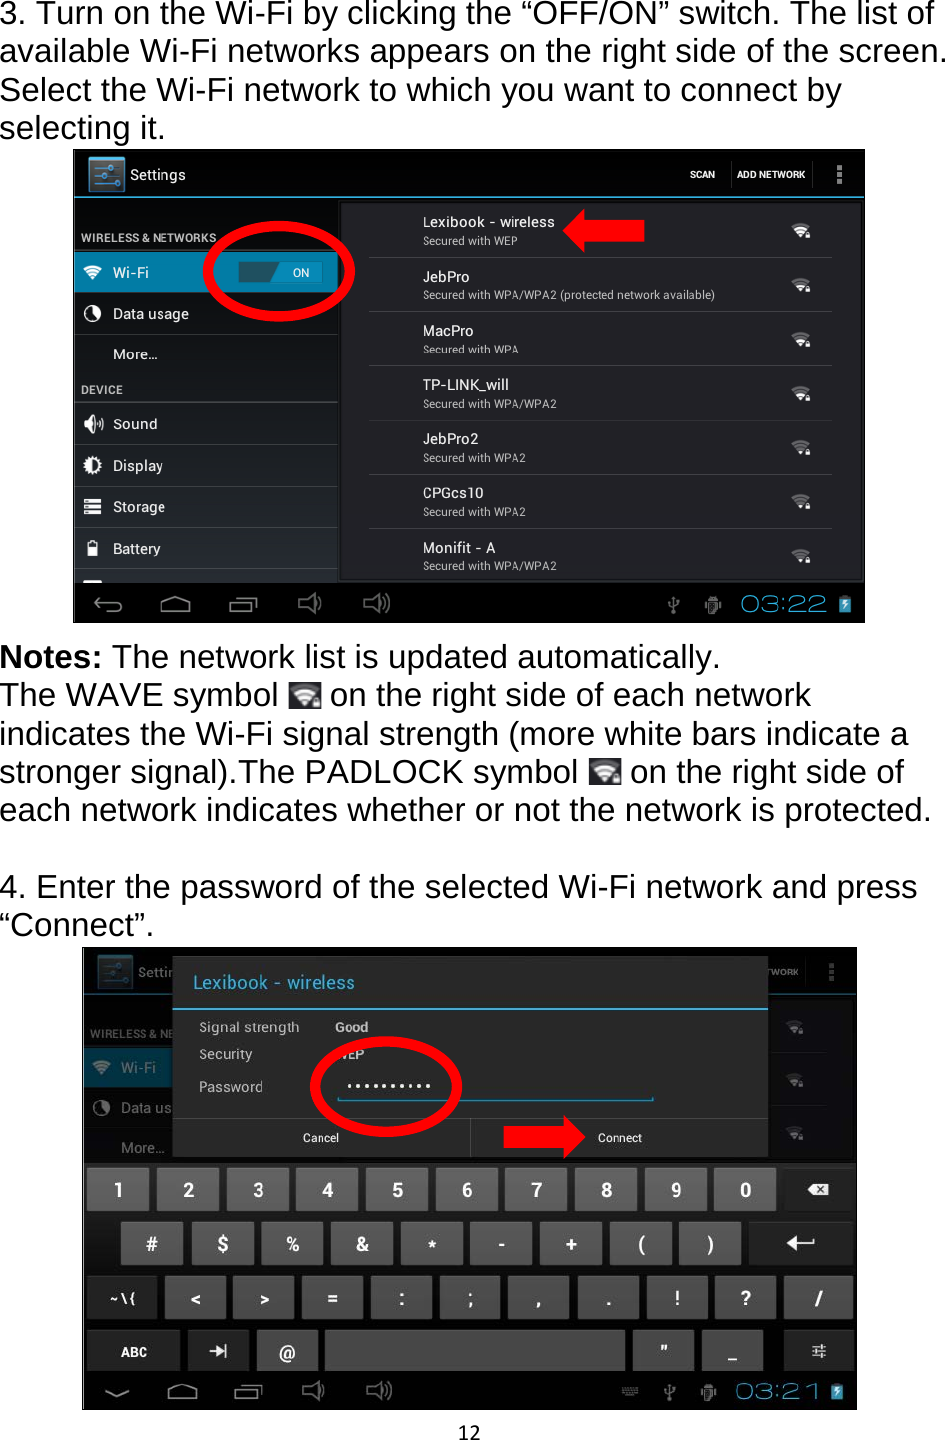 12  3. Turn on the Wi-Fi by clicking the “OFF/ON” switch. The list of available Wi-Fi networks appears on the right side of the screen. Select the Wi-Fi network to which you want to connect by selecting it.  Notes: The network list is updated automatically. The WAVE symbol   on the right side of each network indicates the Wi-Fi signal strength (more white bars indicate a stronger signal).The PADLOCK symbol   on the right side of each network indicates whether or not the network is protected.  4. Enter the password of the selected Wi-Fi network and press “Connect”.  